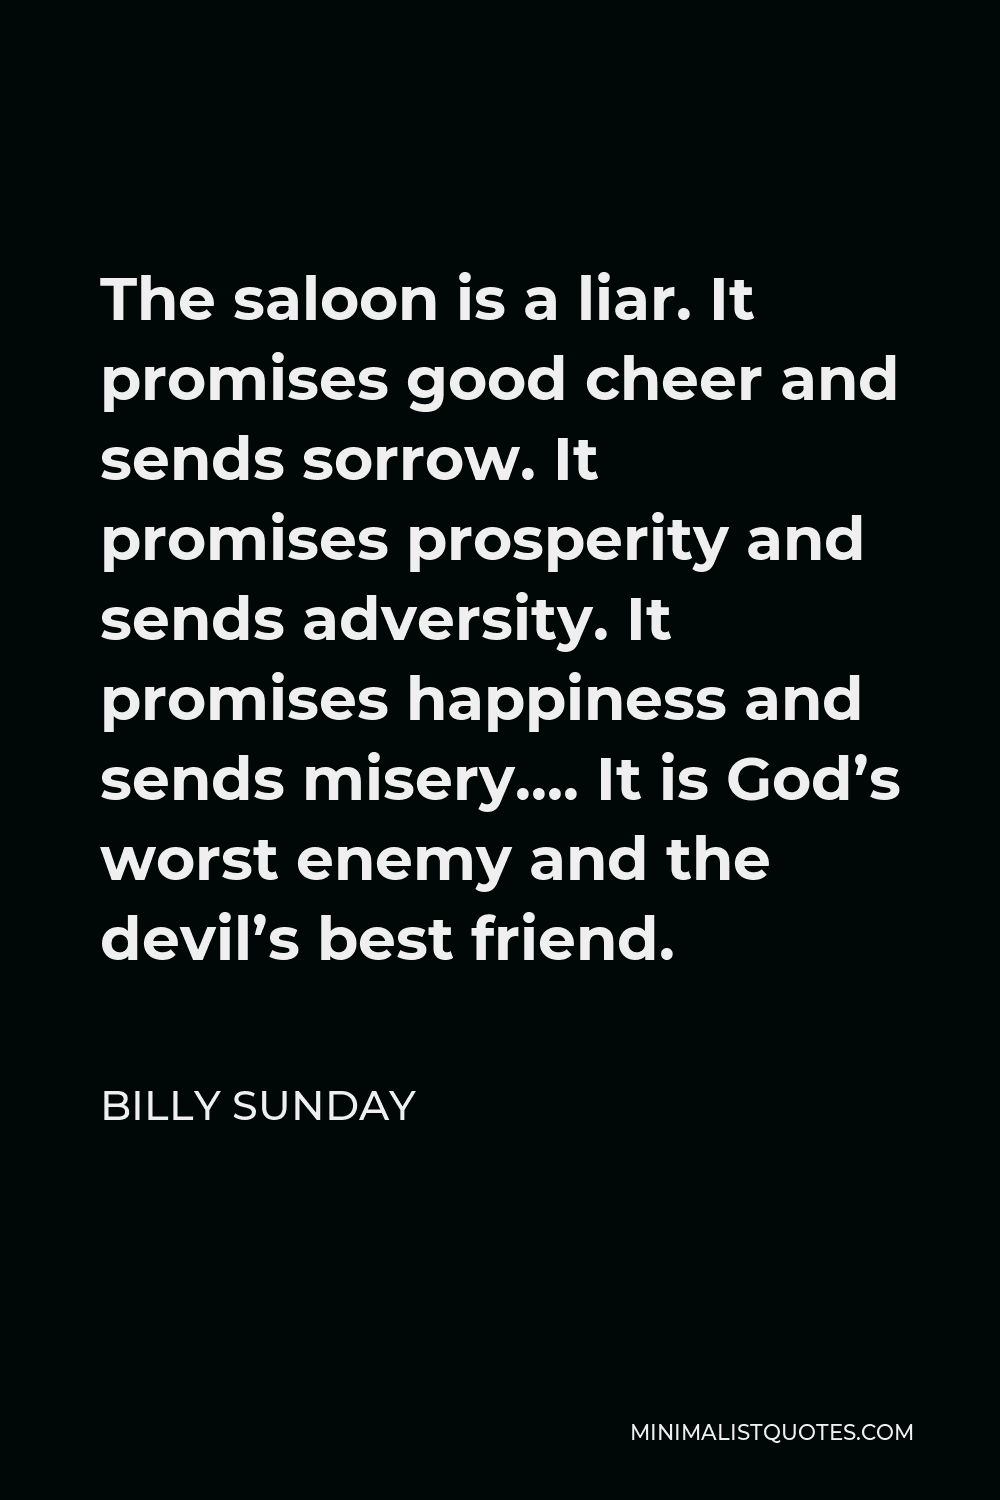 Billy Sunday Quote - The saloon is a liar. It promises good cheer and sends sorrow. It promises prosperity and sends adversity. It promises happiness and sends misery…. It is God’s worst enemy and the devil’s best friend.